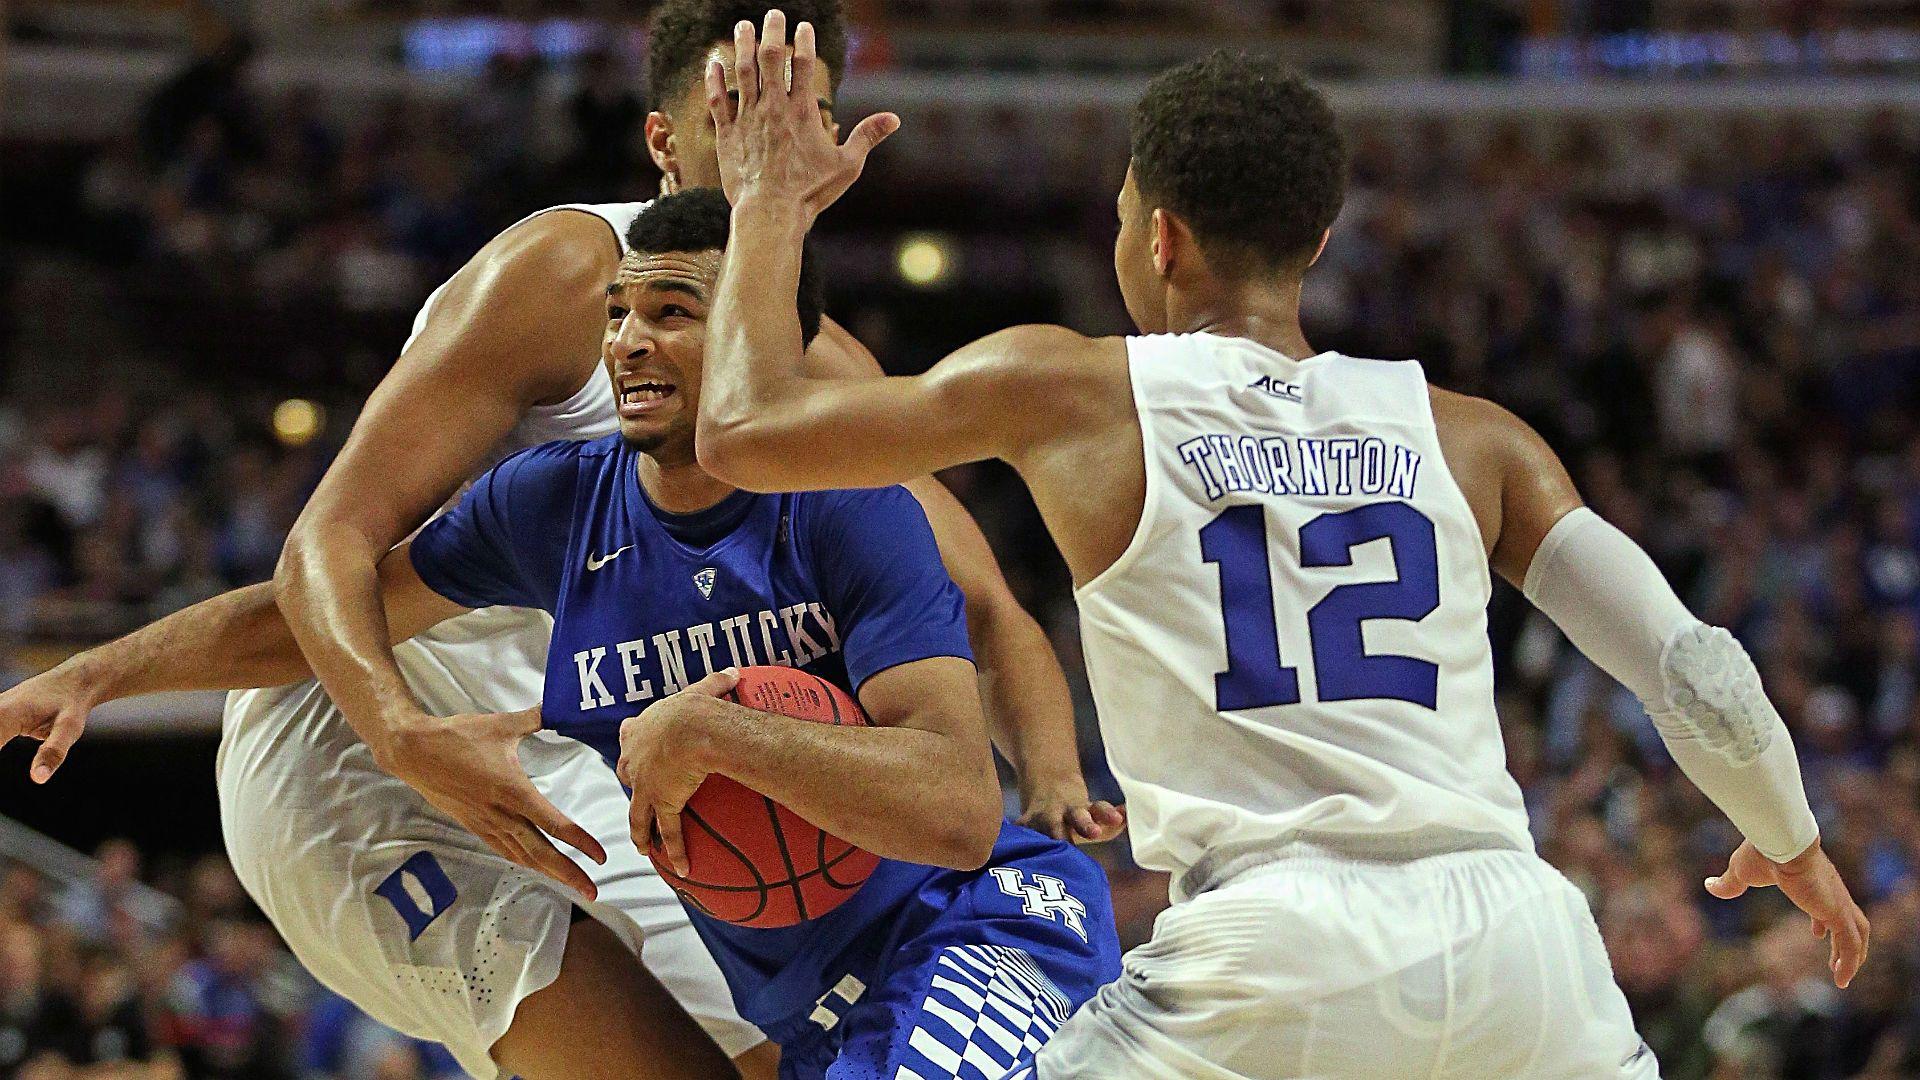 Champions Classic: Kentucky's backcourt game on point in victory